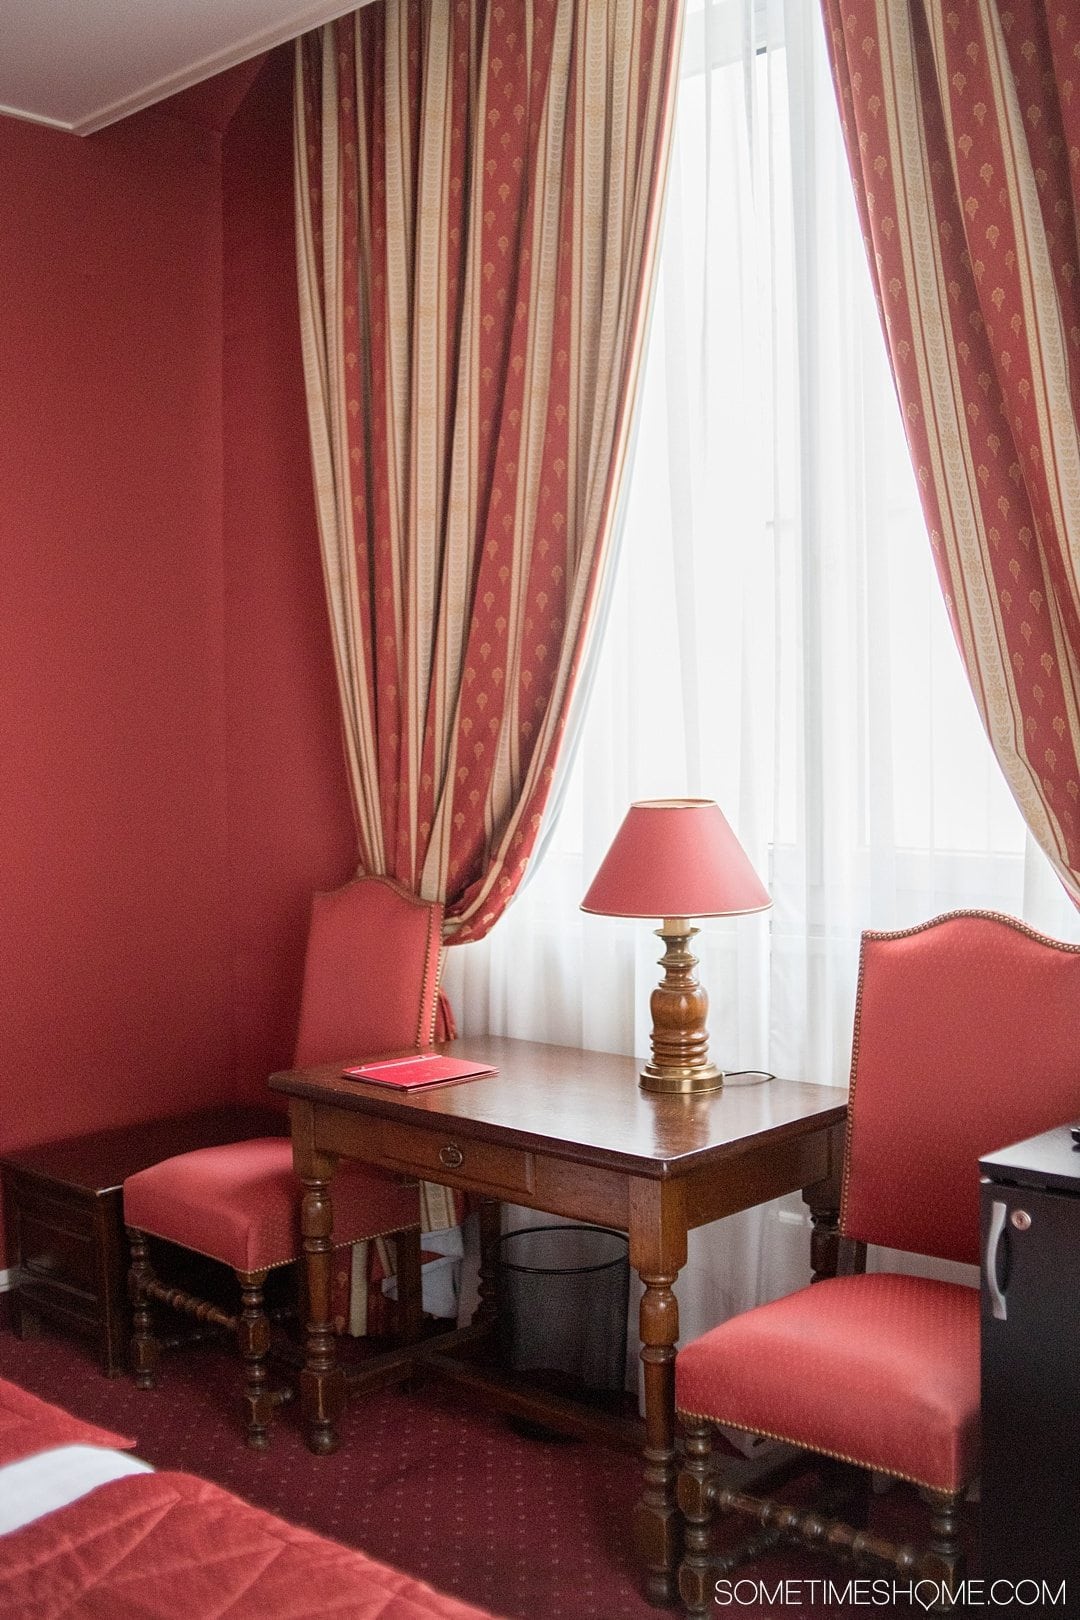 Paris hotel cozy boutique accommodation with very affordable prices in the historic Le Marais district. Click through to the article for a complete review!